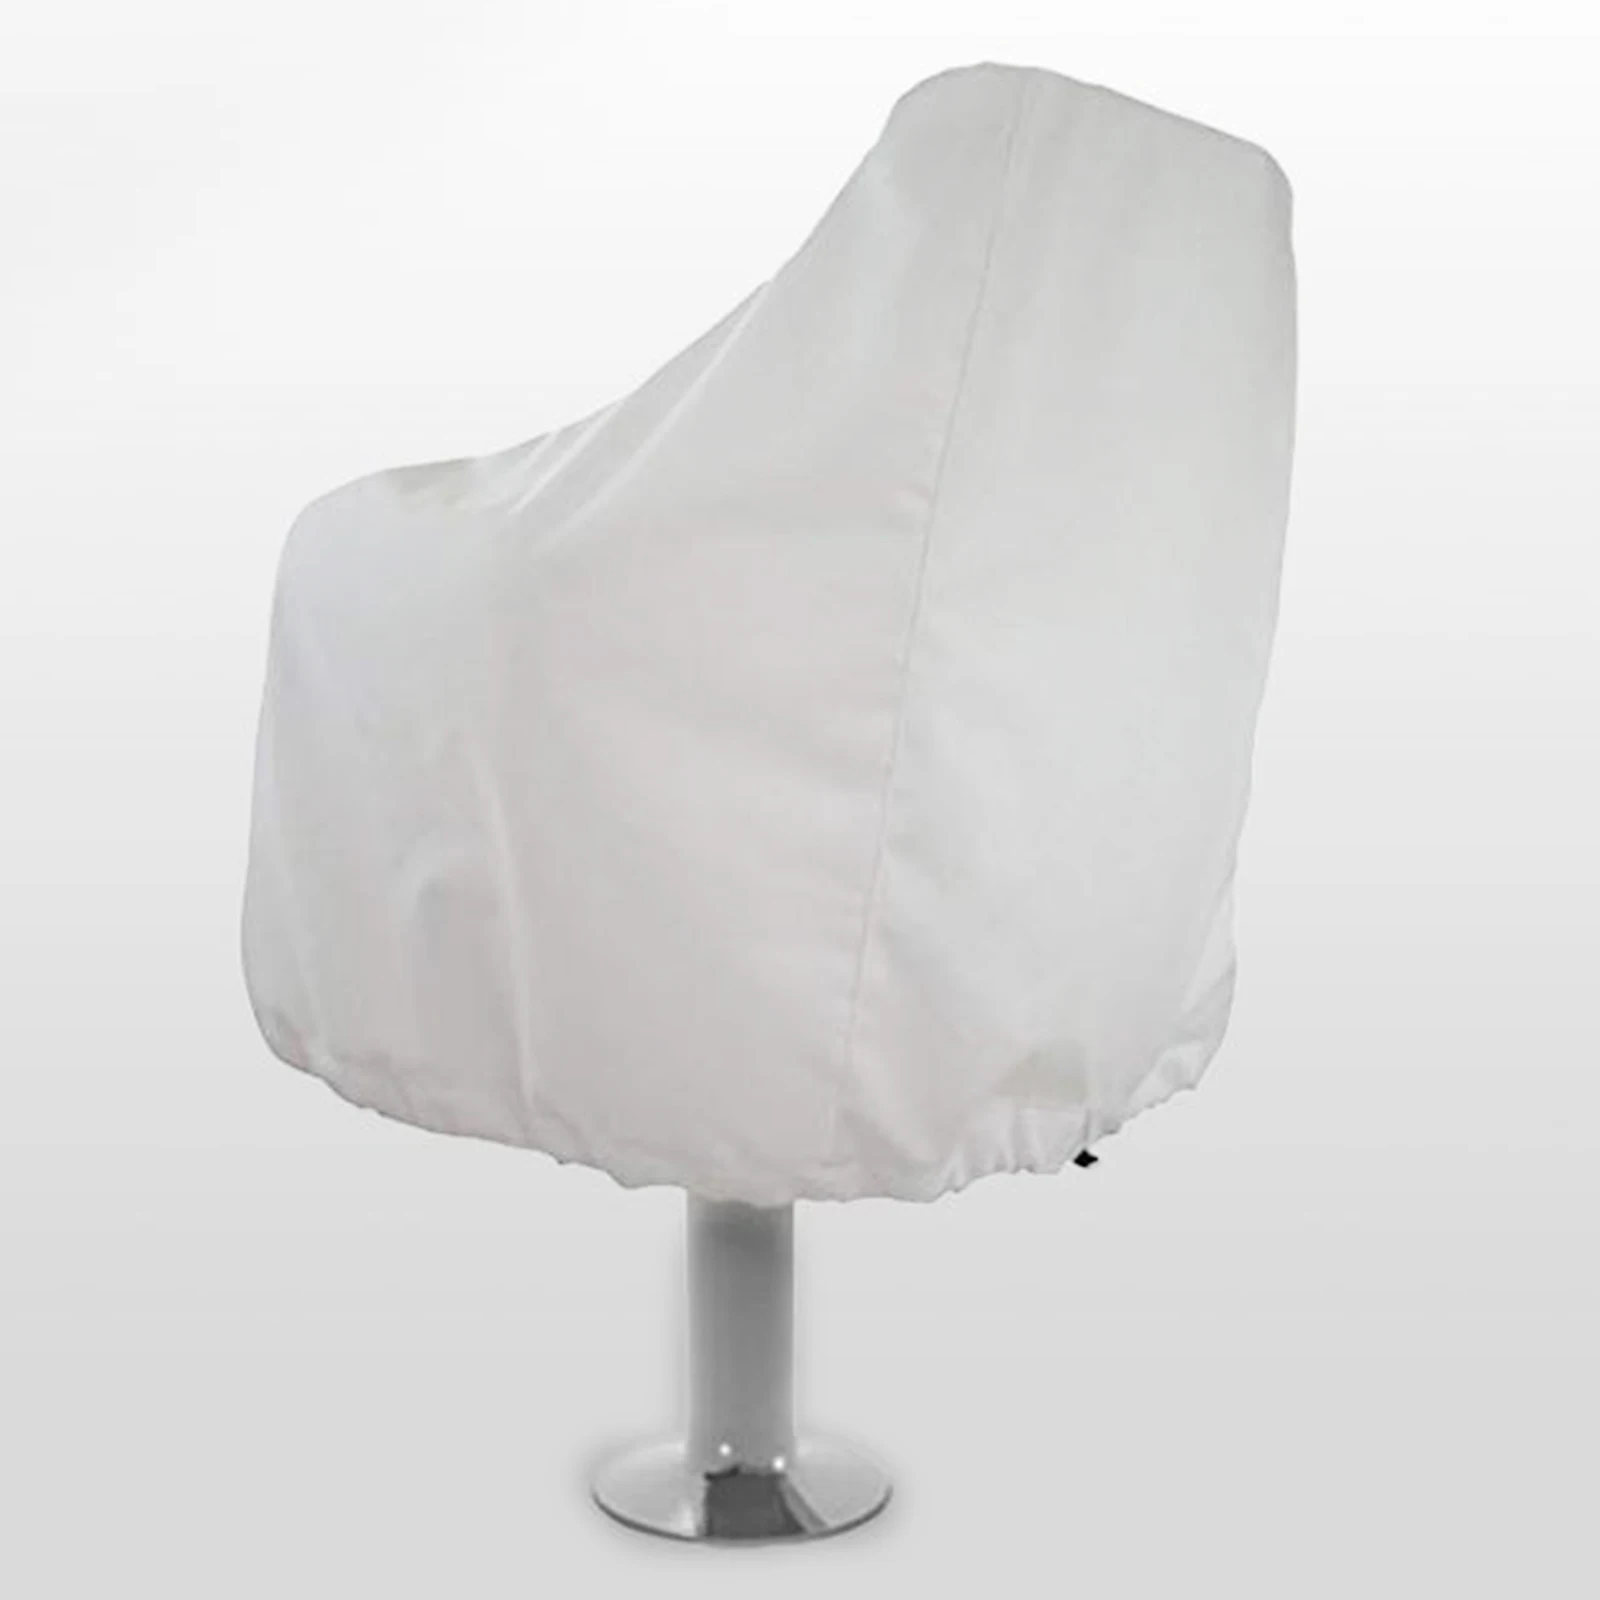 Durable Boat Seat Cover Yacht Heavy-Duty UV-Resistant Ship Helm Chair Cover